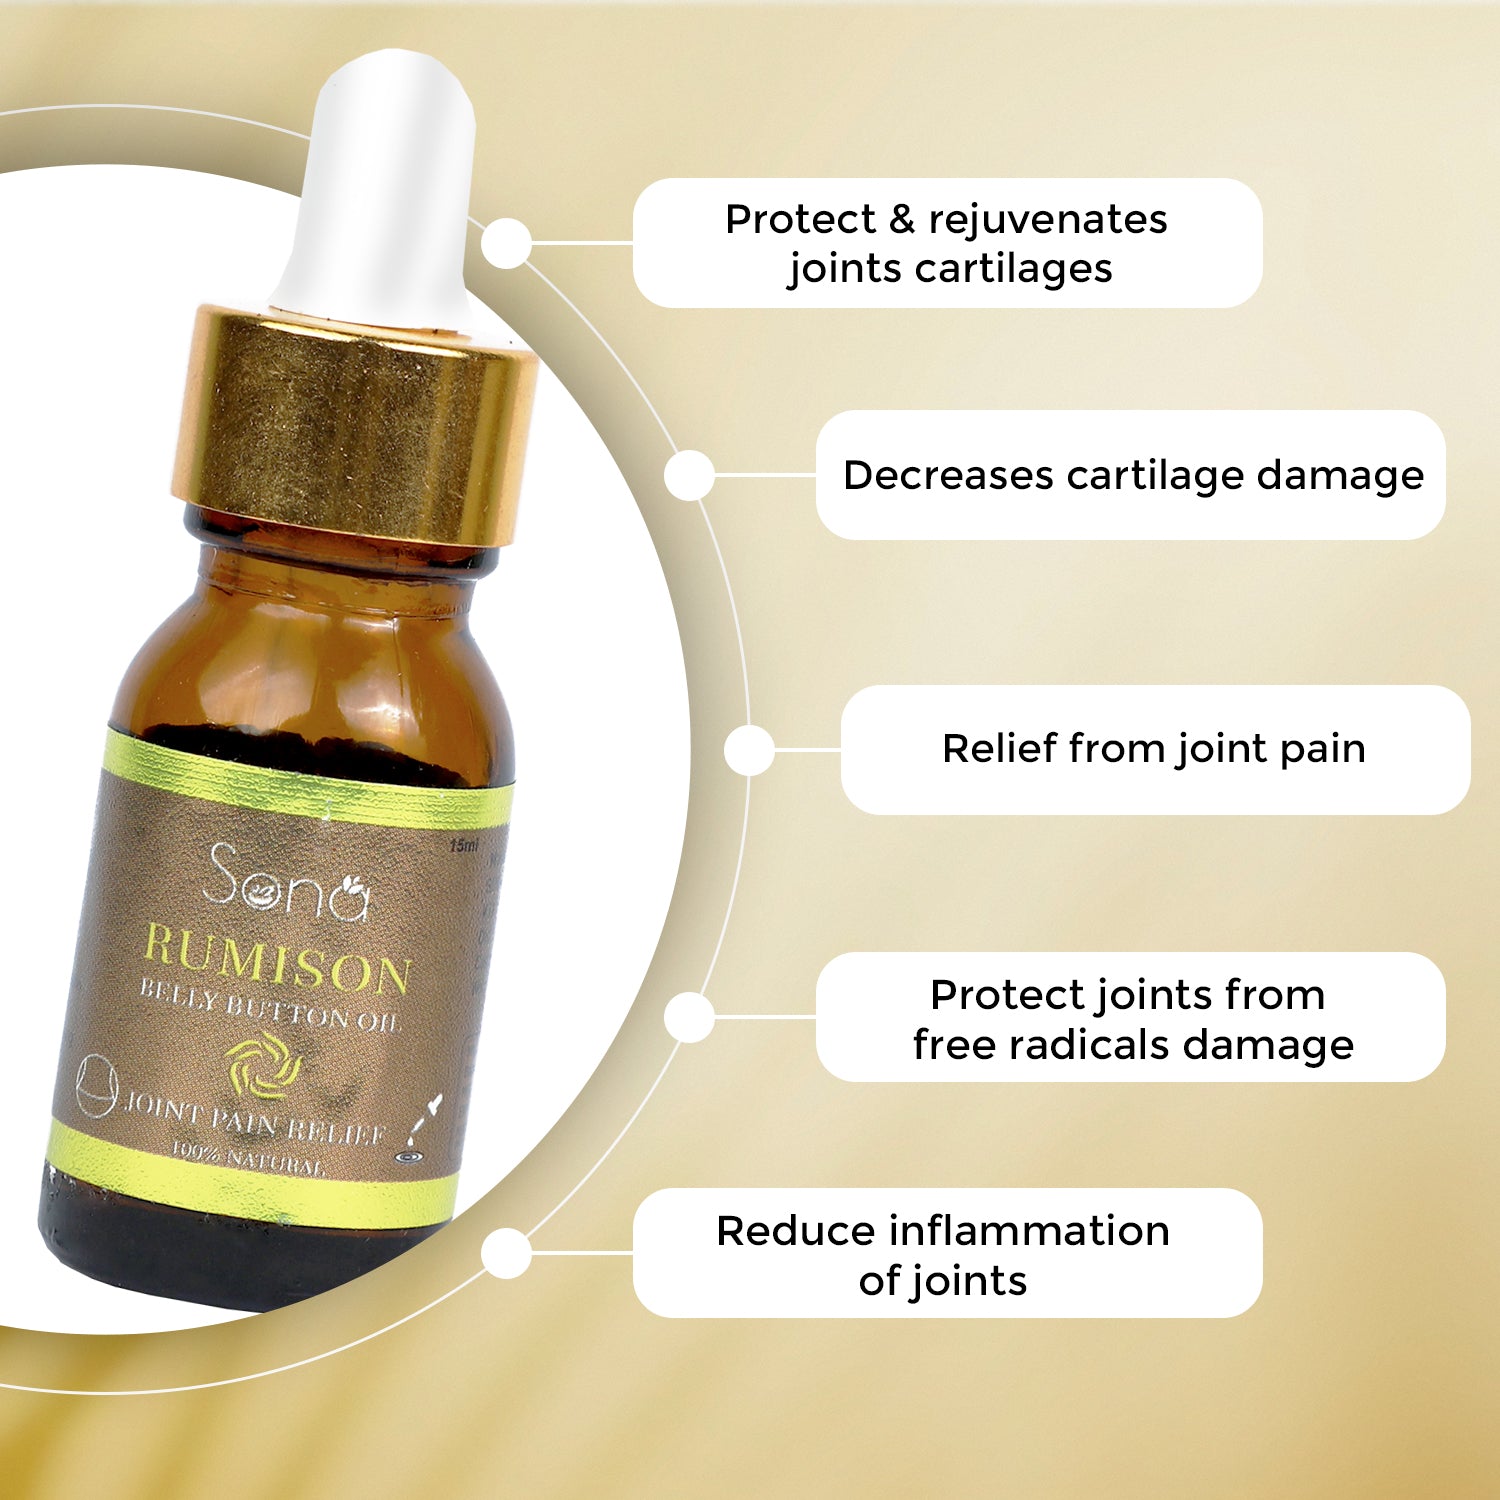 Sona Rumison Belly Button Oil for Joint Pain Relief